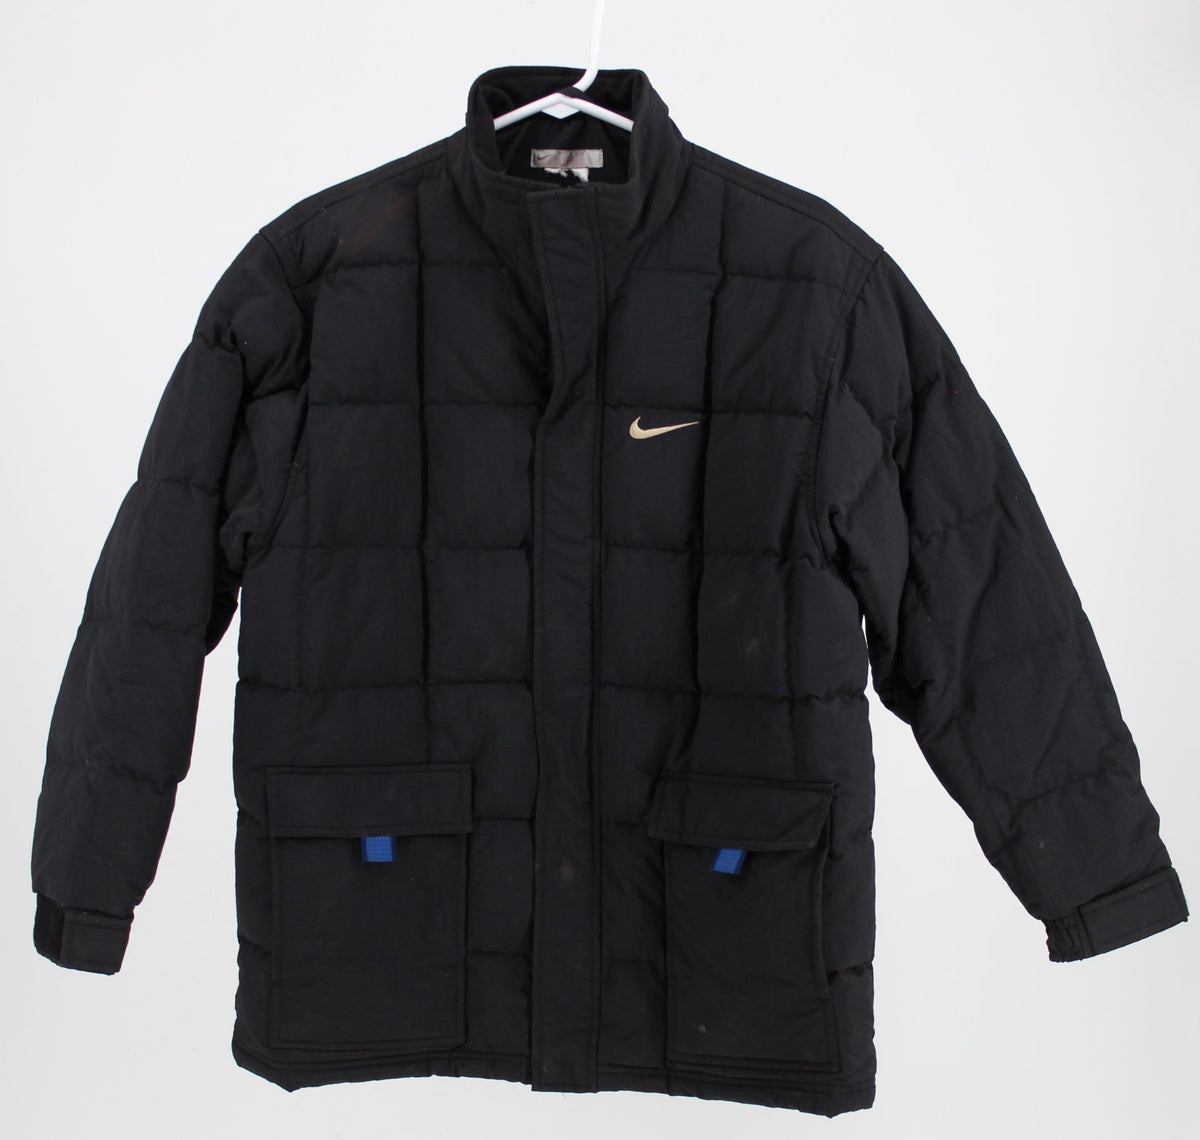 Nike Black Short Puffer Coat with Reflective Tabs